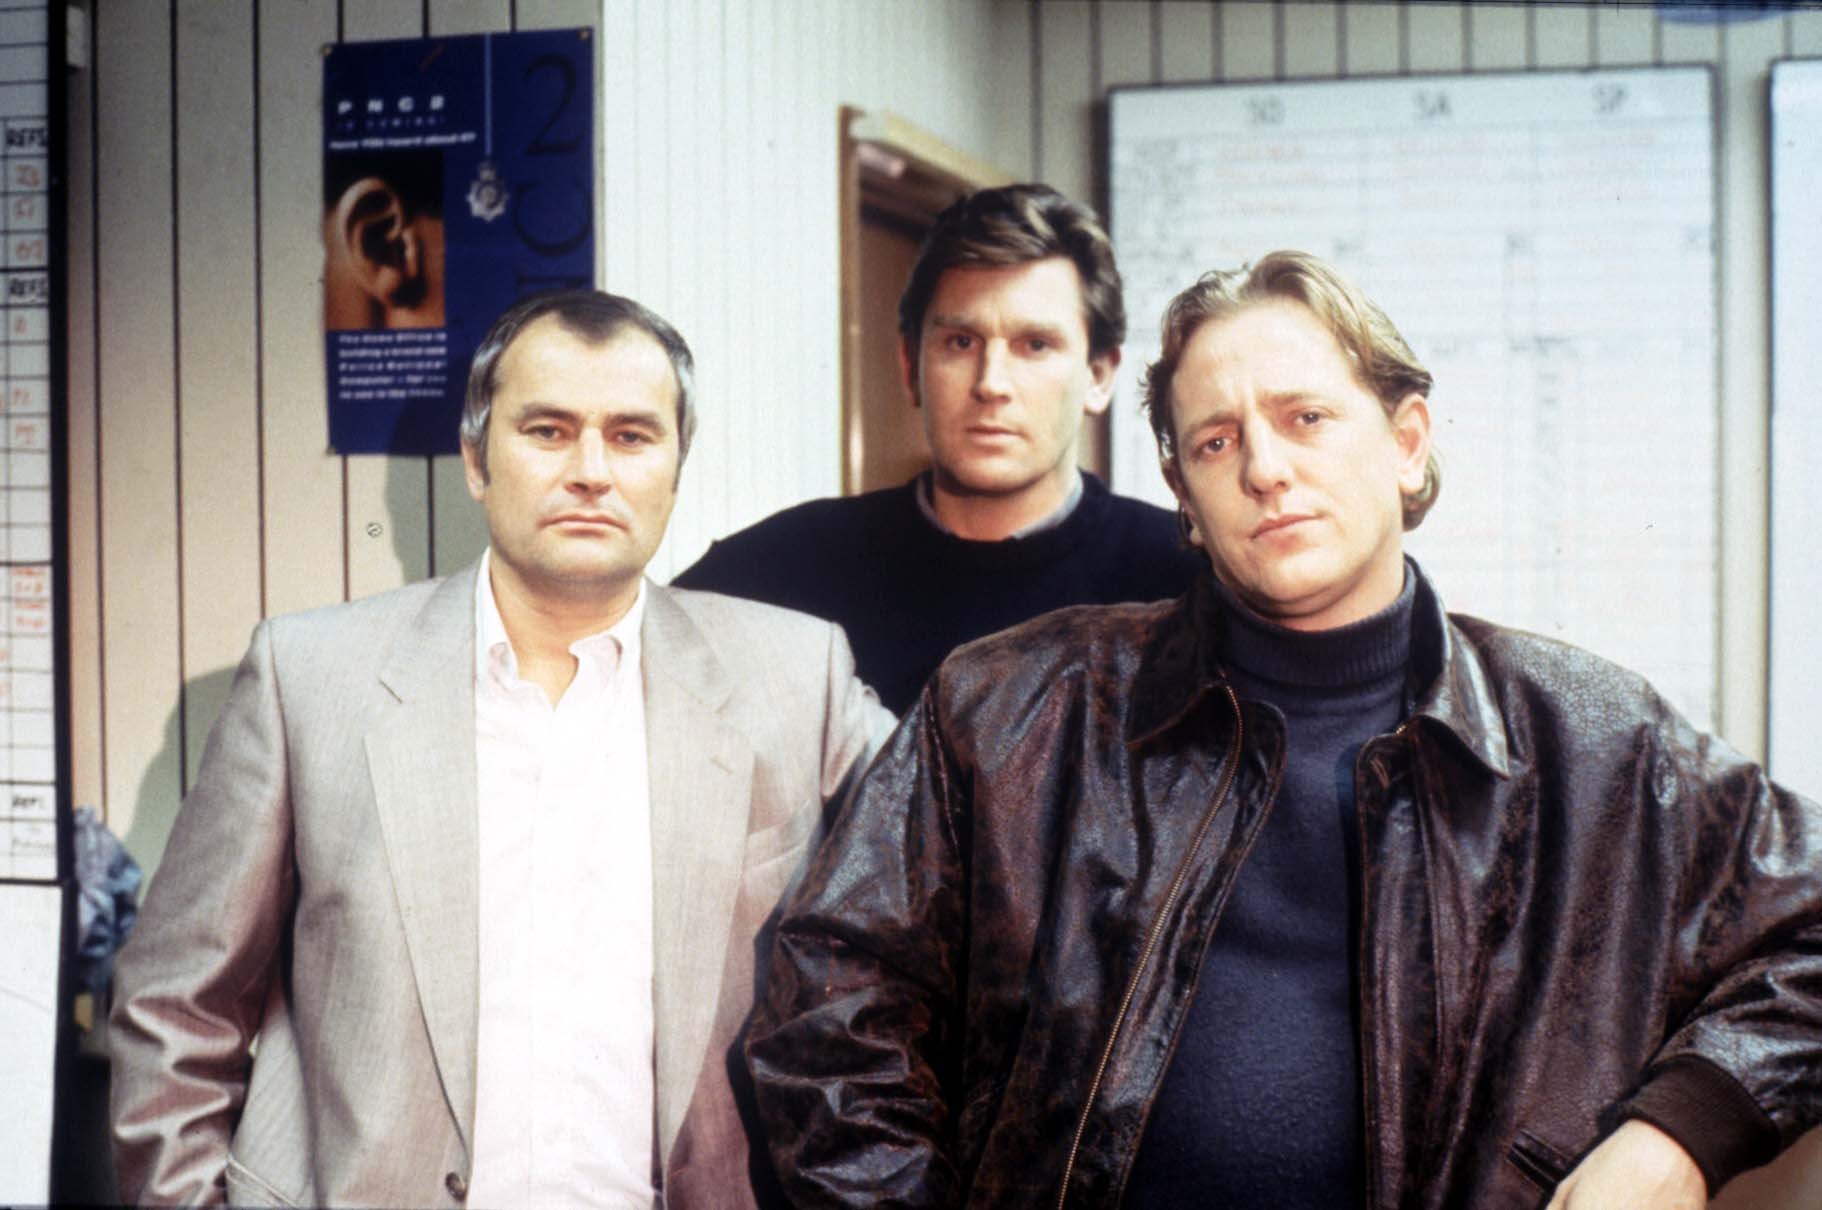 ITV’s The Bill is set to return to screens in 2023